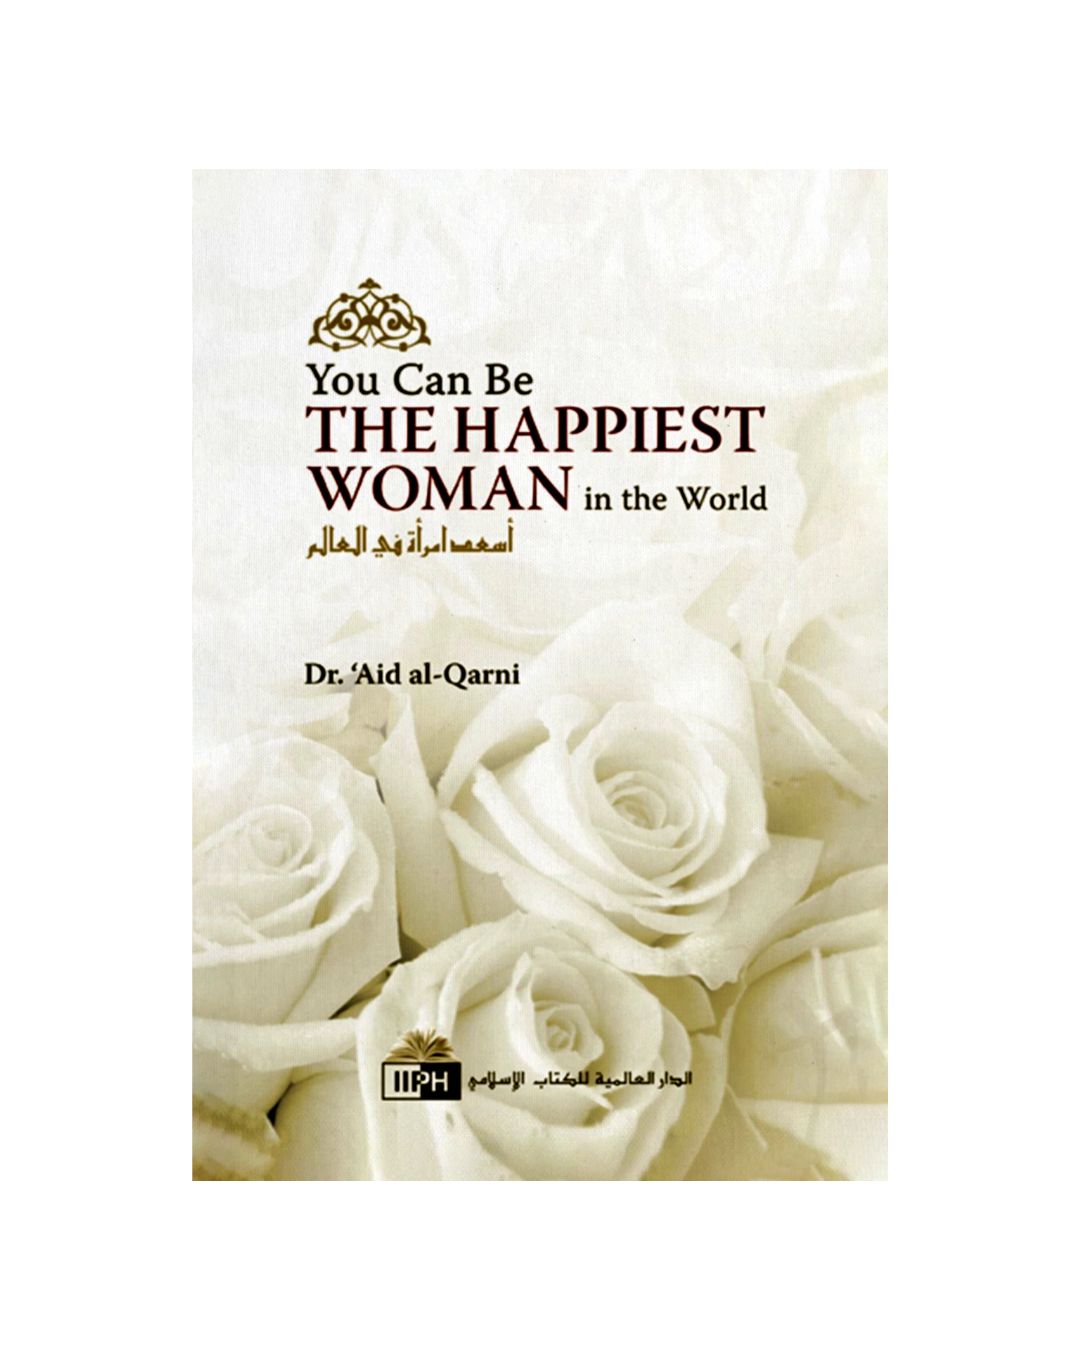 You Can Be The Happiest Woman In The World by A'id al-Qarni